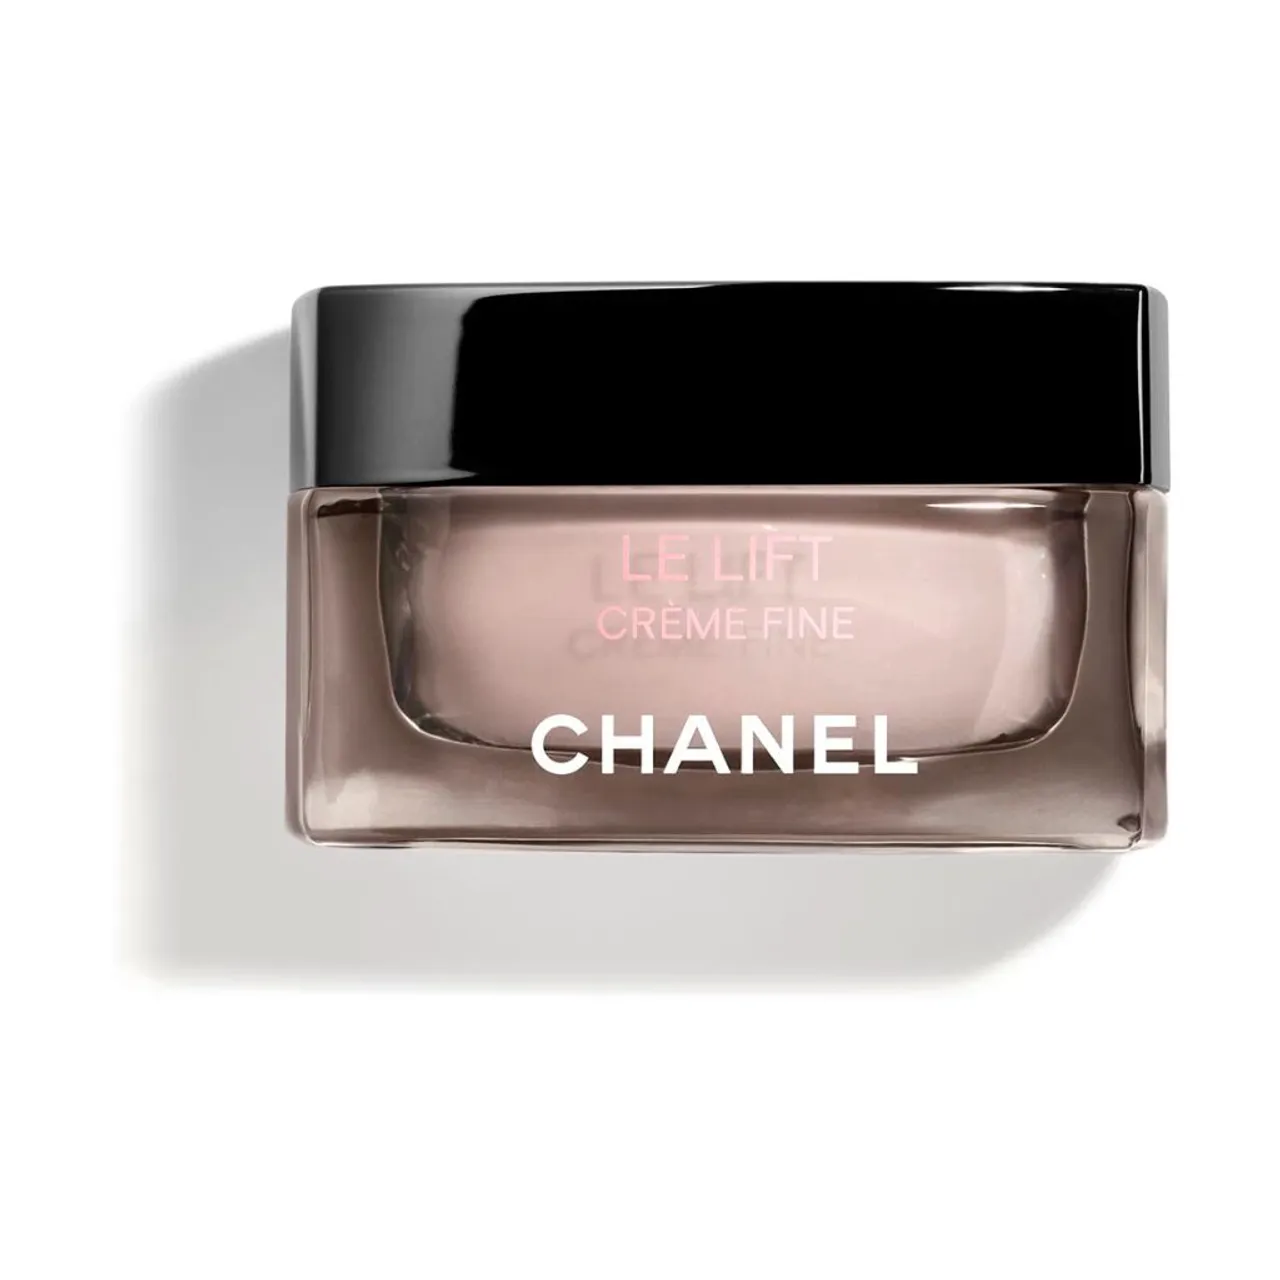 CHANEL Le Lift Smoothing And Firming Light Cream - Unisex - Size: 50ml